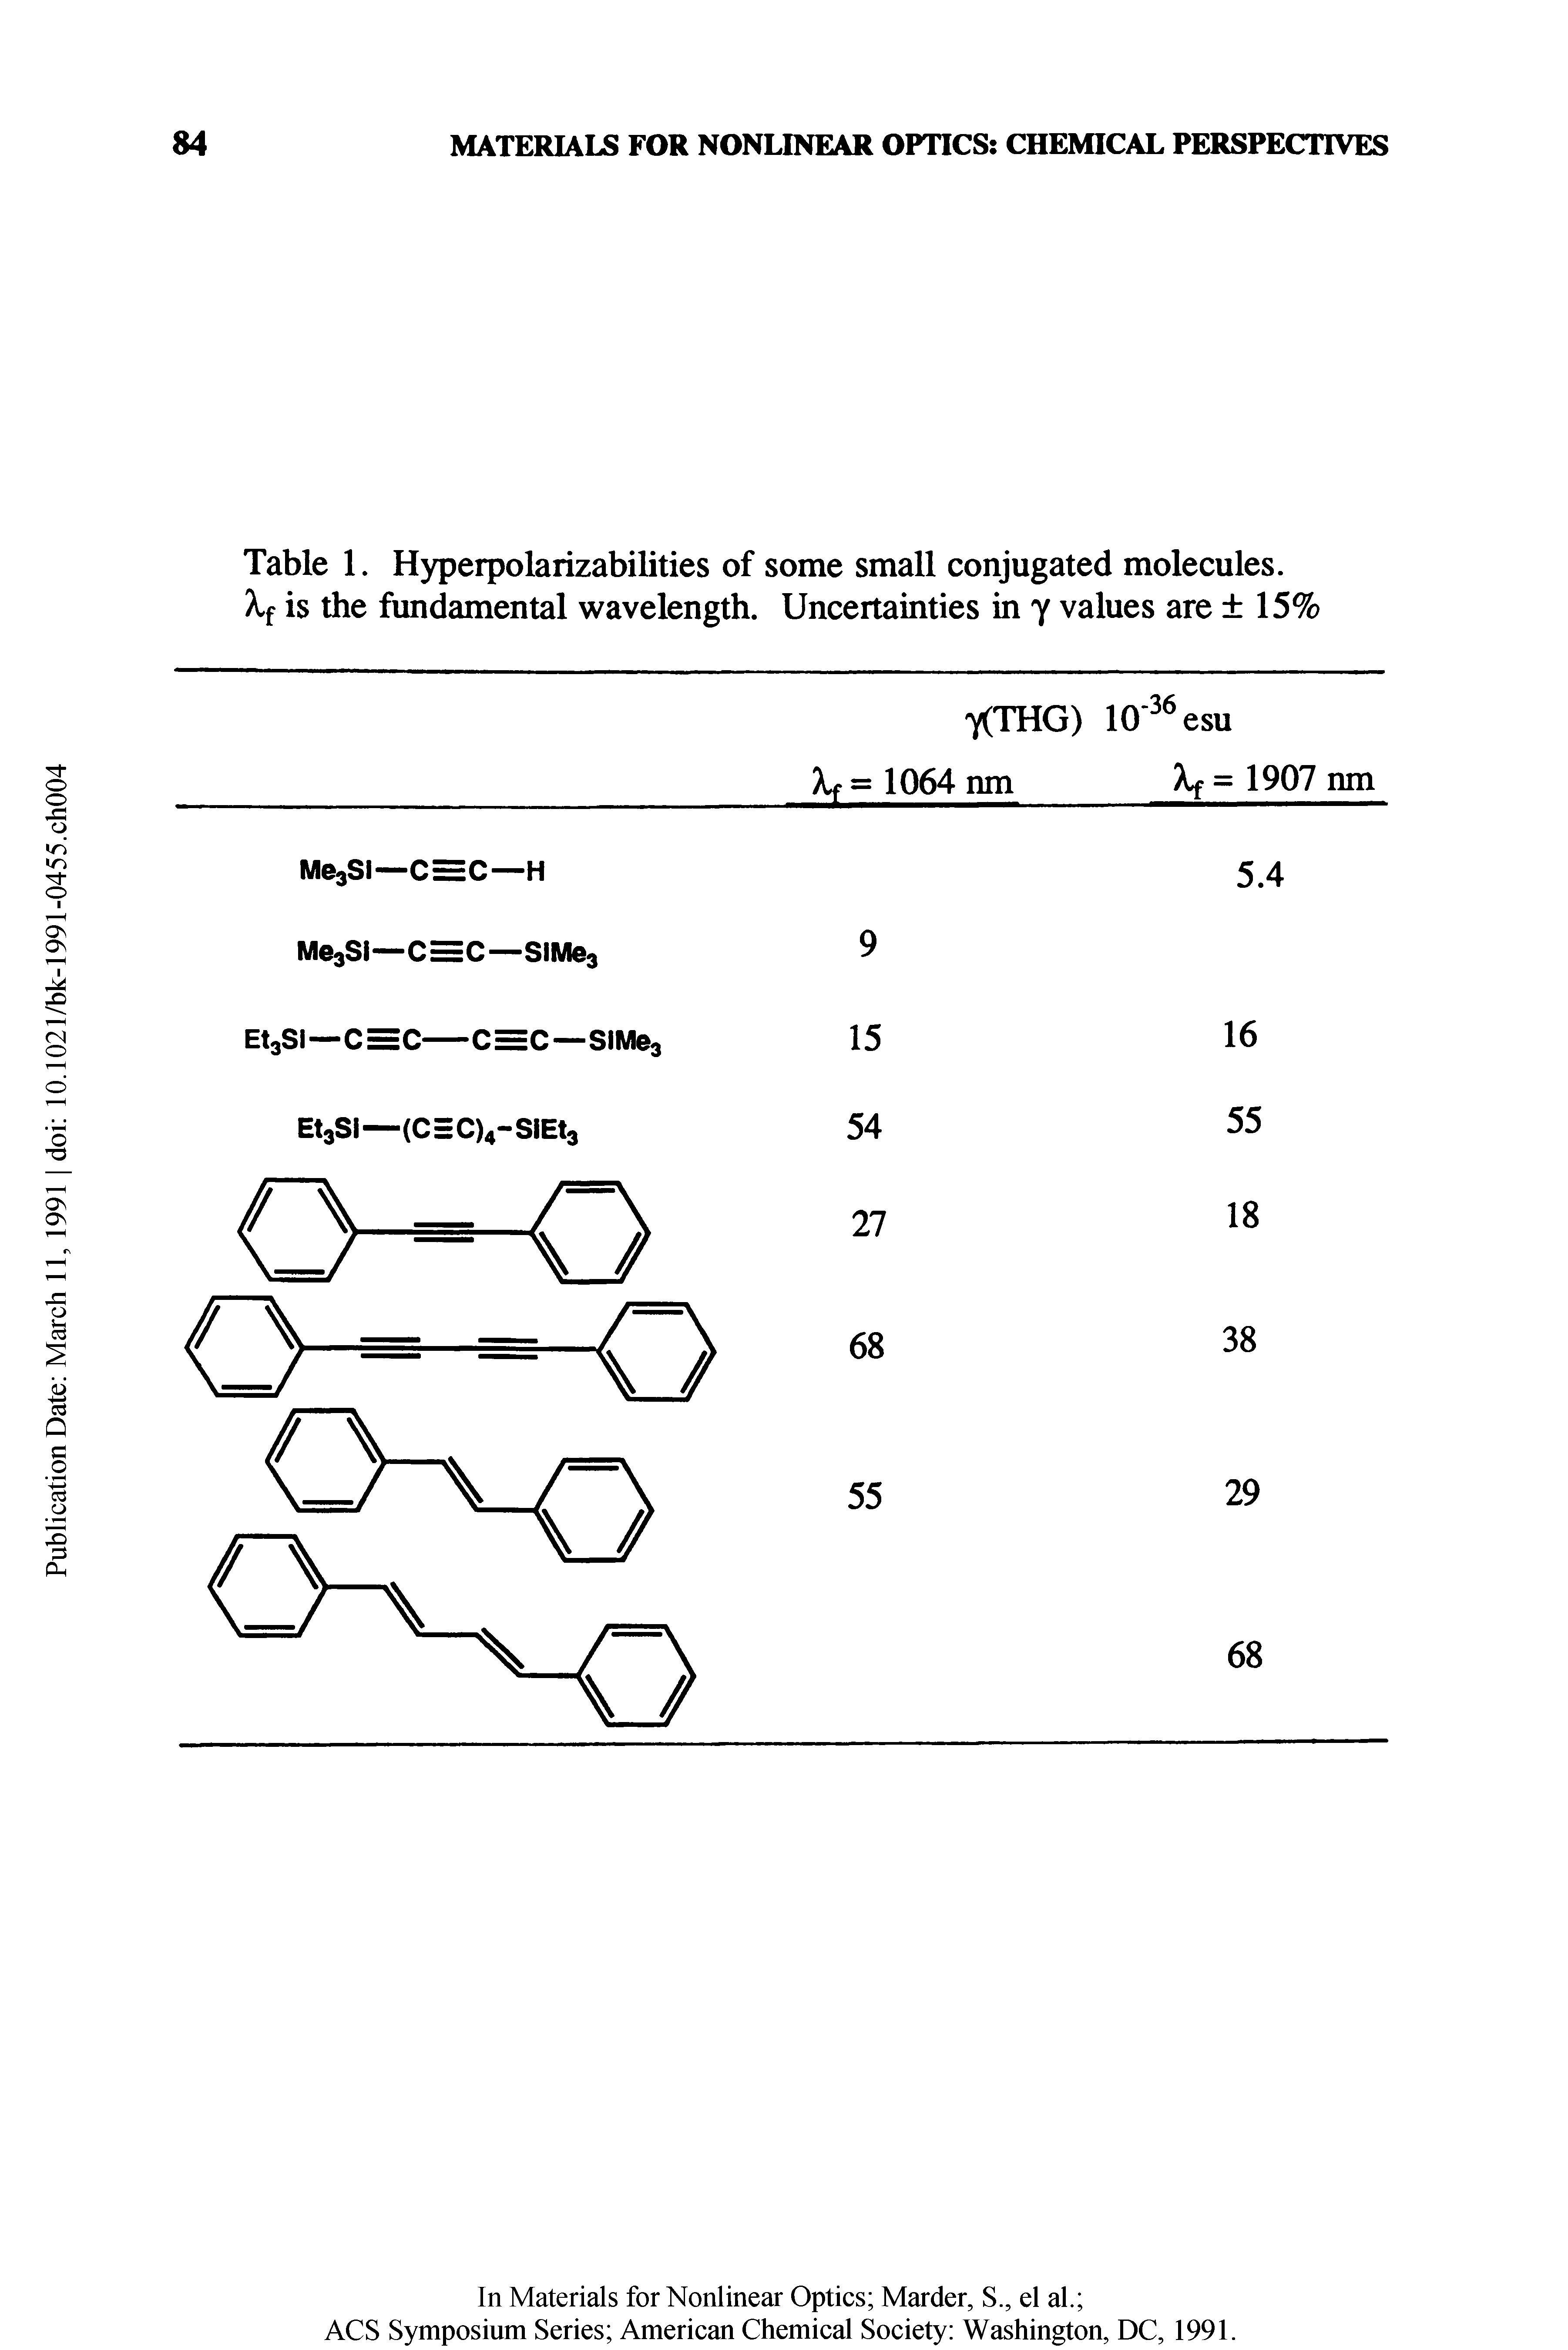 Table 1. Hyperpolarizabilities of some small conjugated molecules.